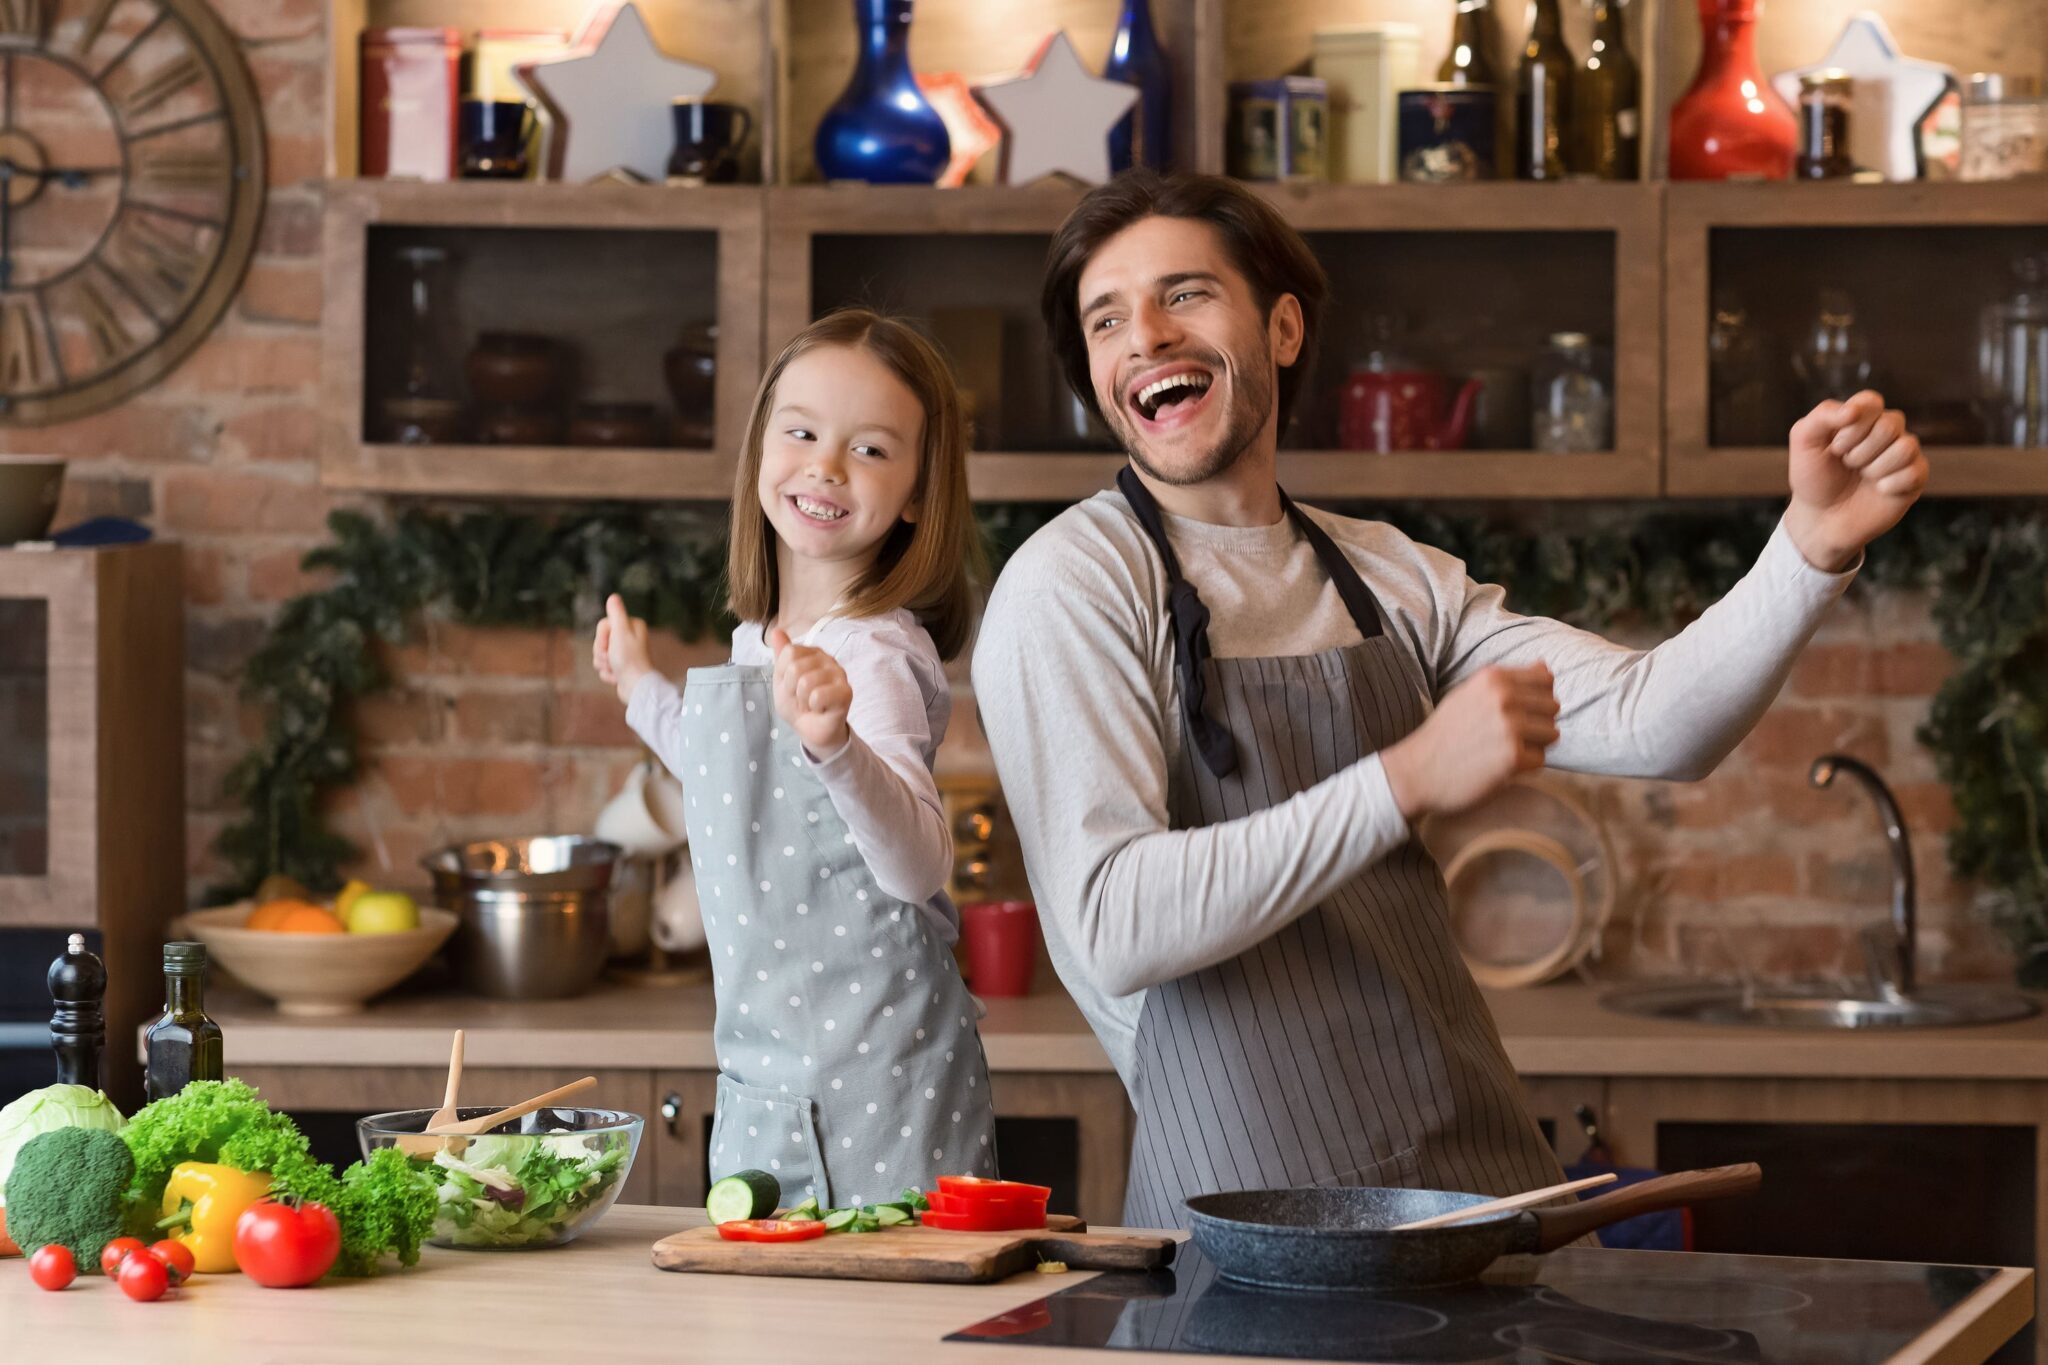 Chef and child dance in kitchen